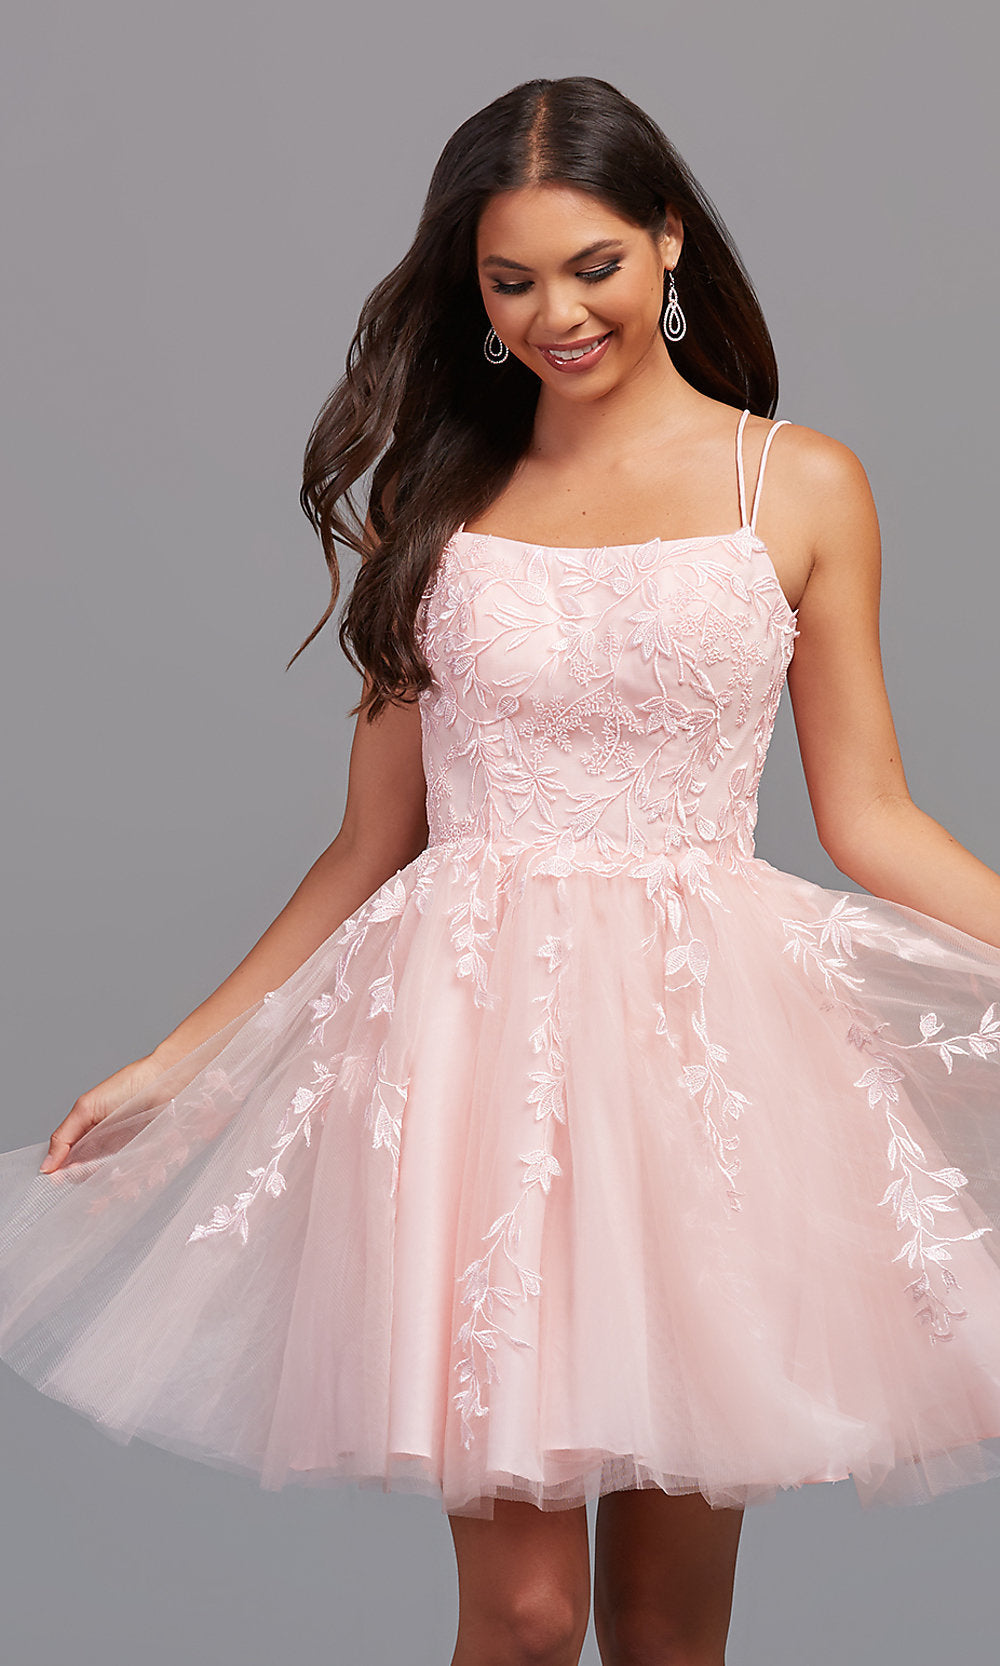 Short Babydoll Prom Dress with Corset - PromGirl